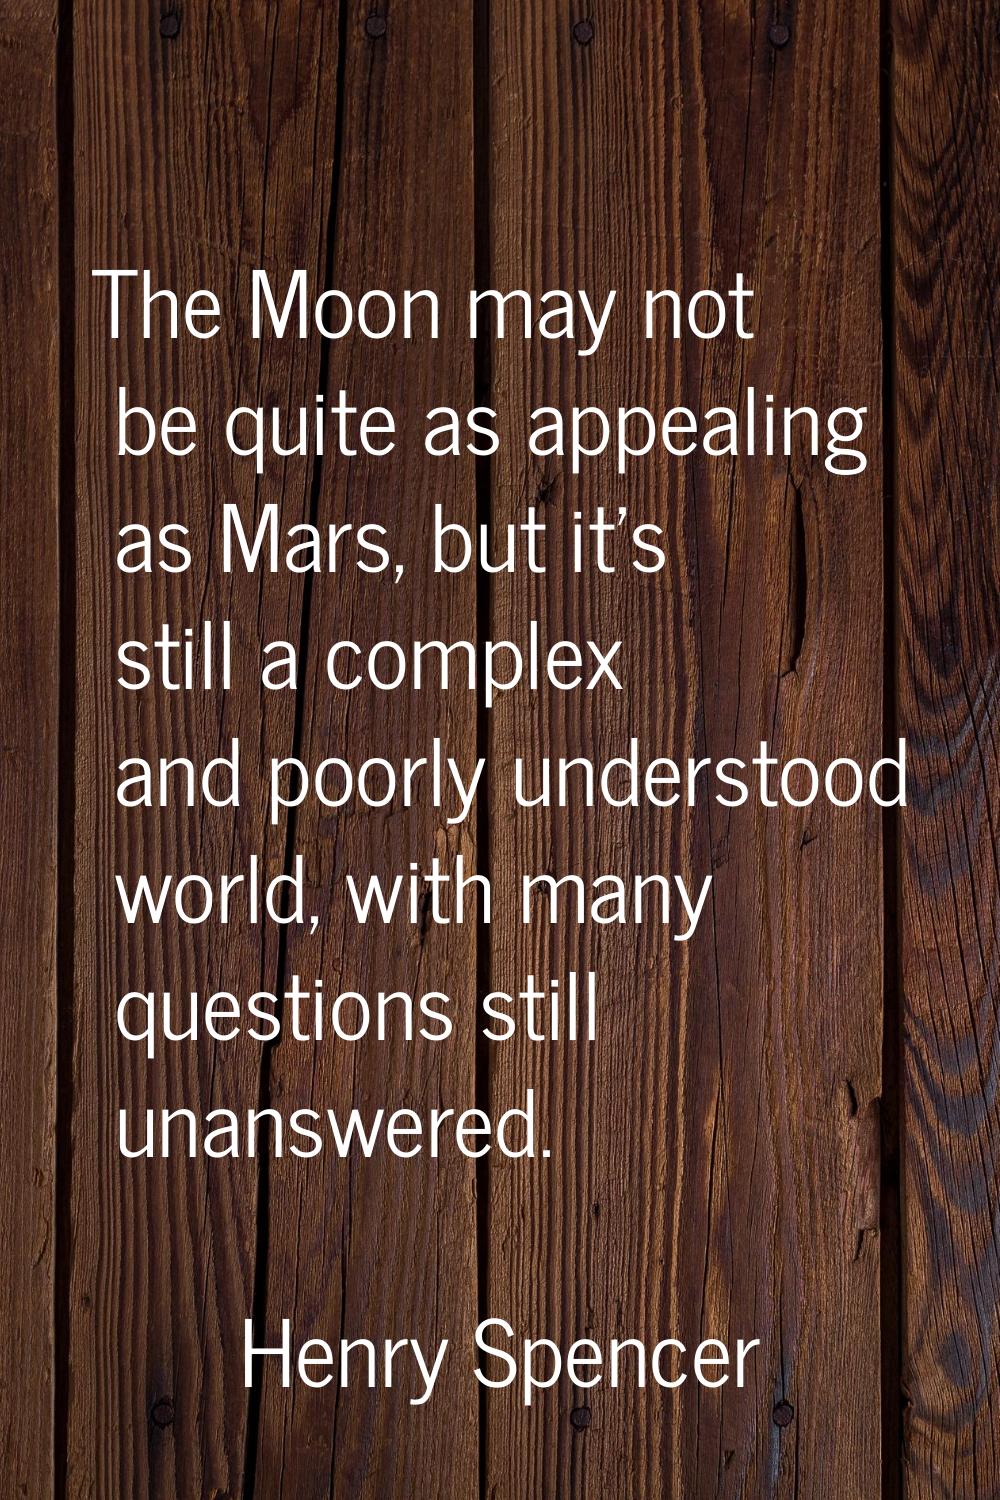 The Moon may not be quite as appealing as Mars, but it's still a complex and poorly understood worl